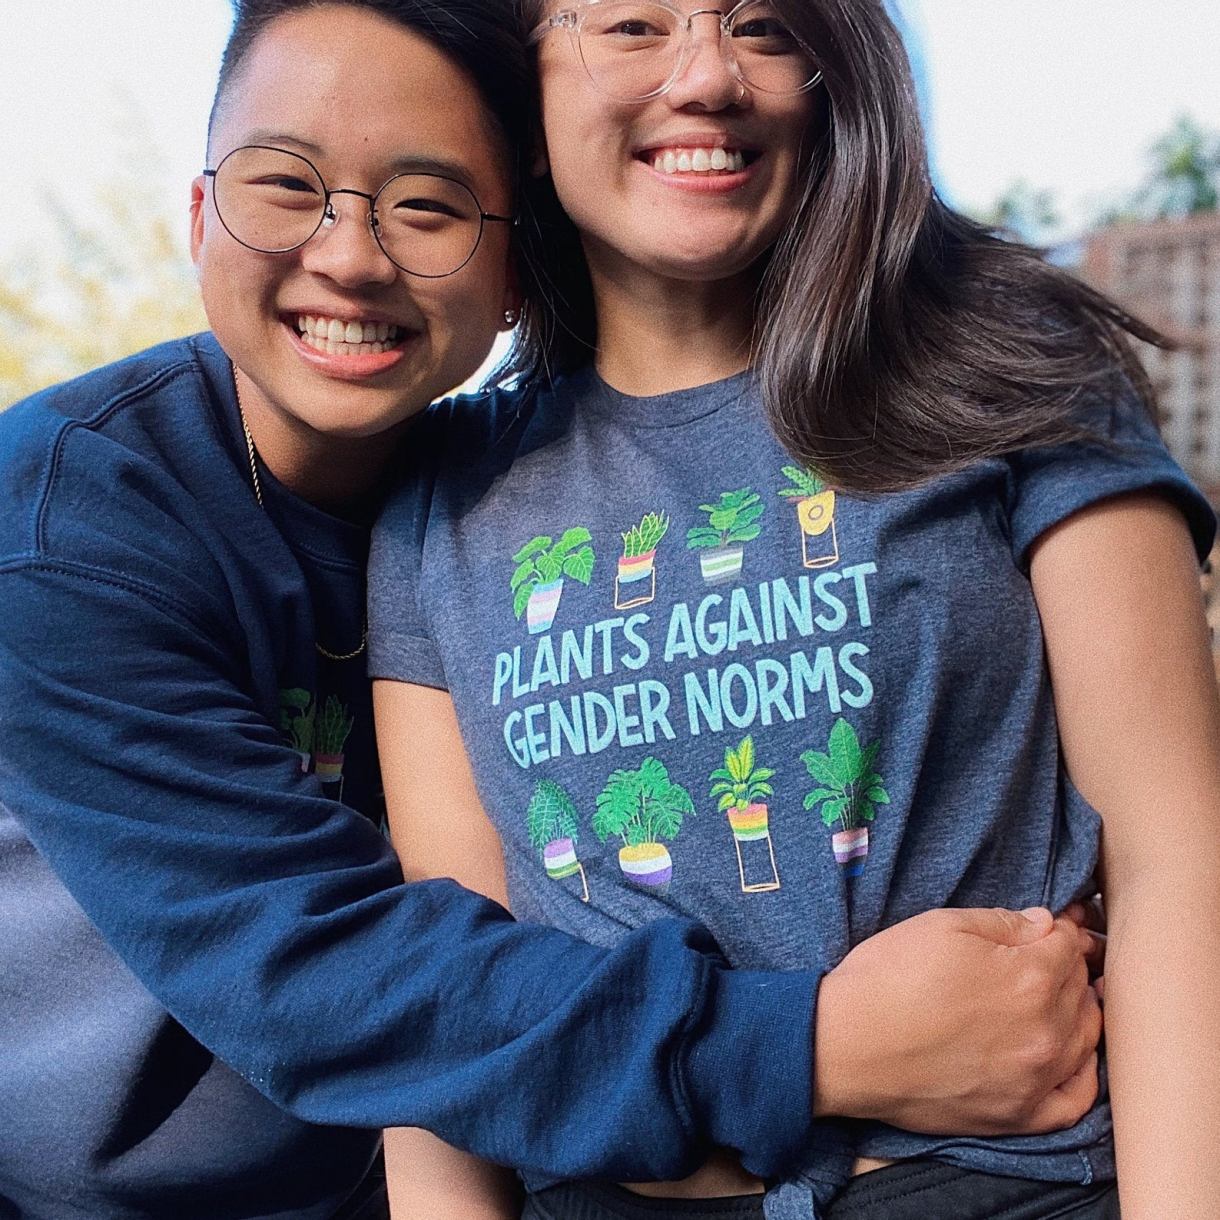 The artist hugging a model wearing a "Plants Against Gender Norms" t-shirt that has pictures of house-potted plants above and below the slogan.